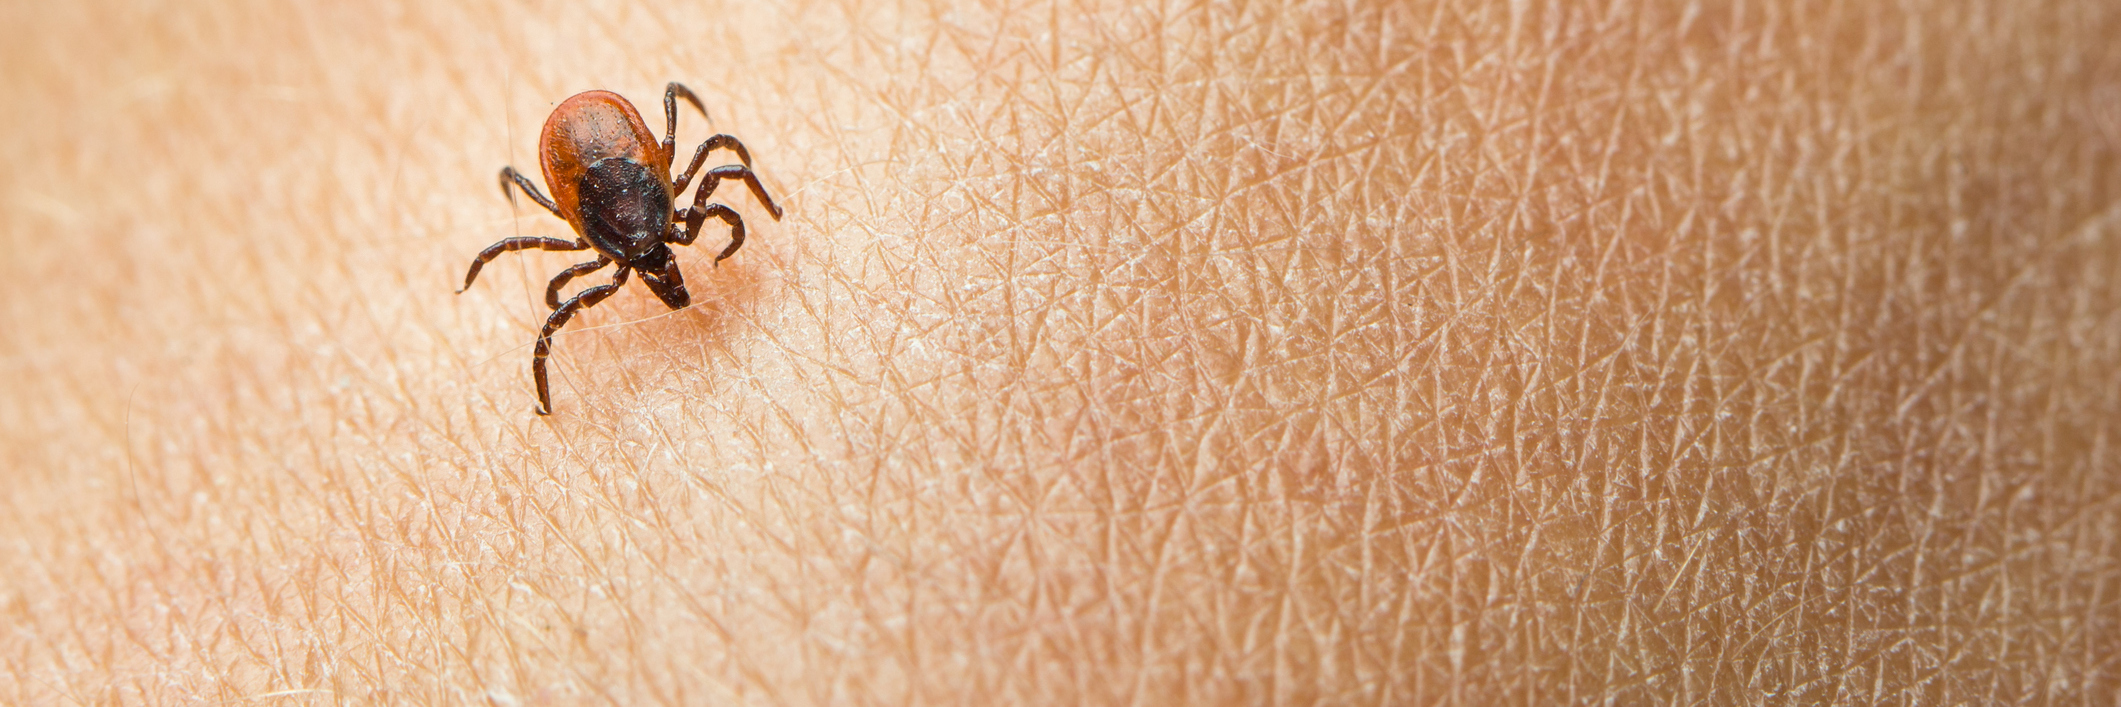 tick crawling on a person's skin